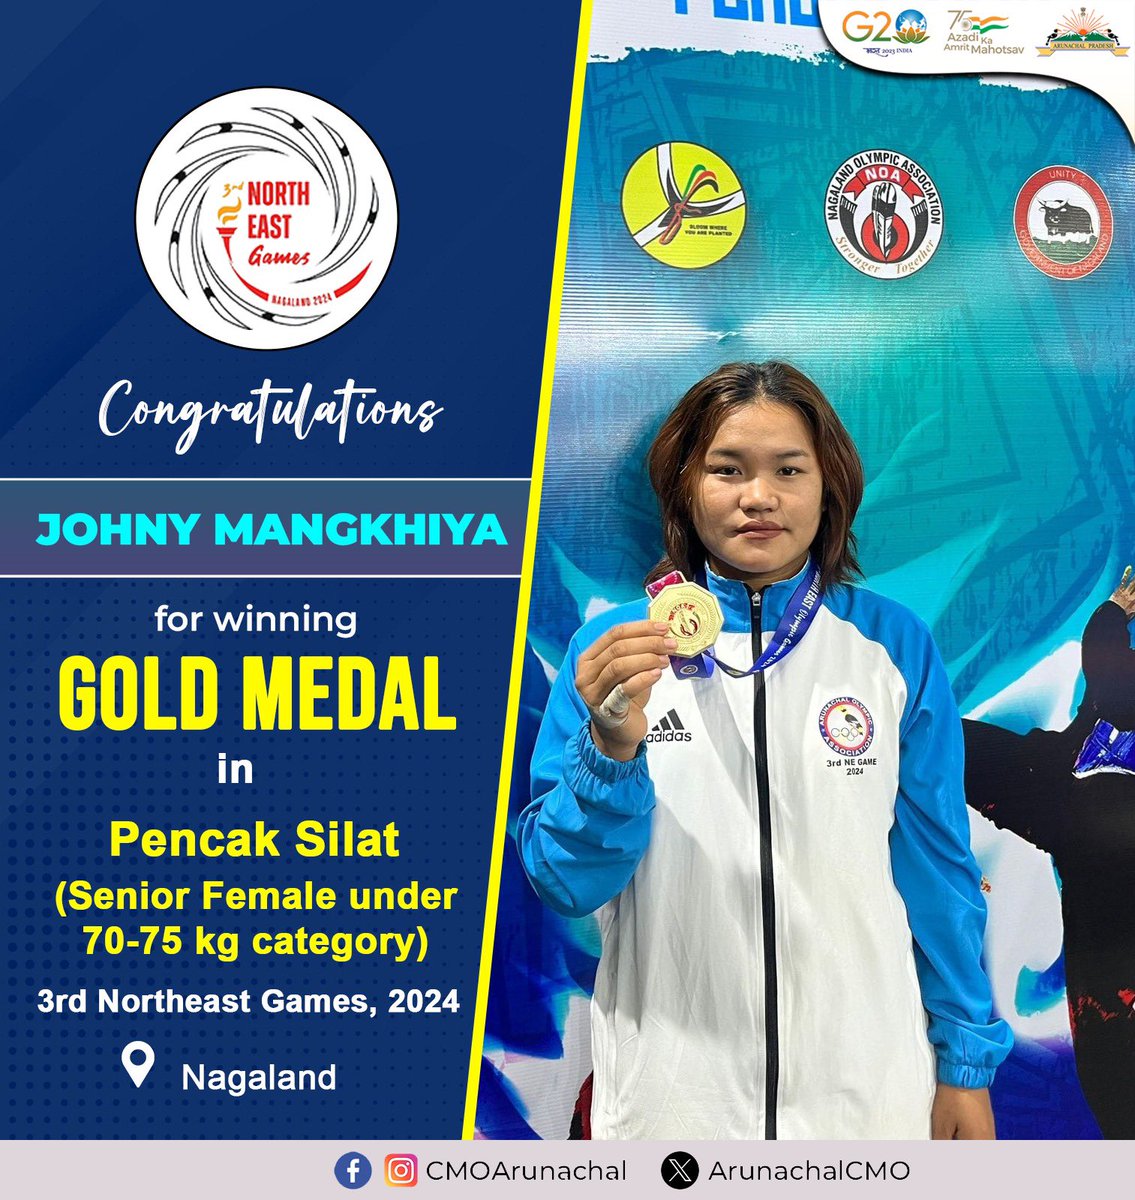 Another golden moment for Arunachal Pradesh as Johny Mangkhiya secures victory in Pencak Silat (Senior Female, 70-75kg category) at the 3rd Northeast Games, 2024! 🥇 Congratulations, Johny, on your remarkable achievement! #JohnyMangkhiya #GoldMedal #NortheastGames